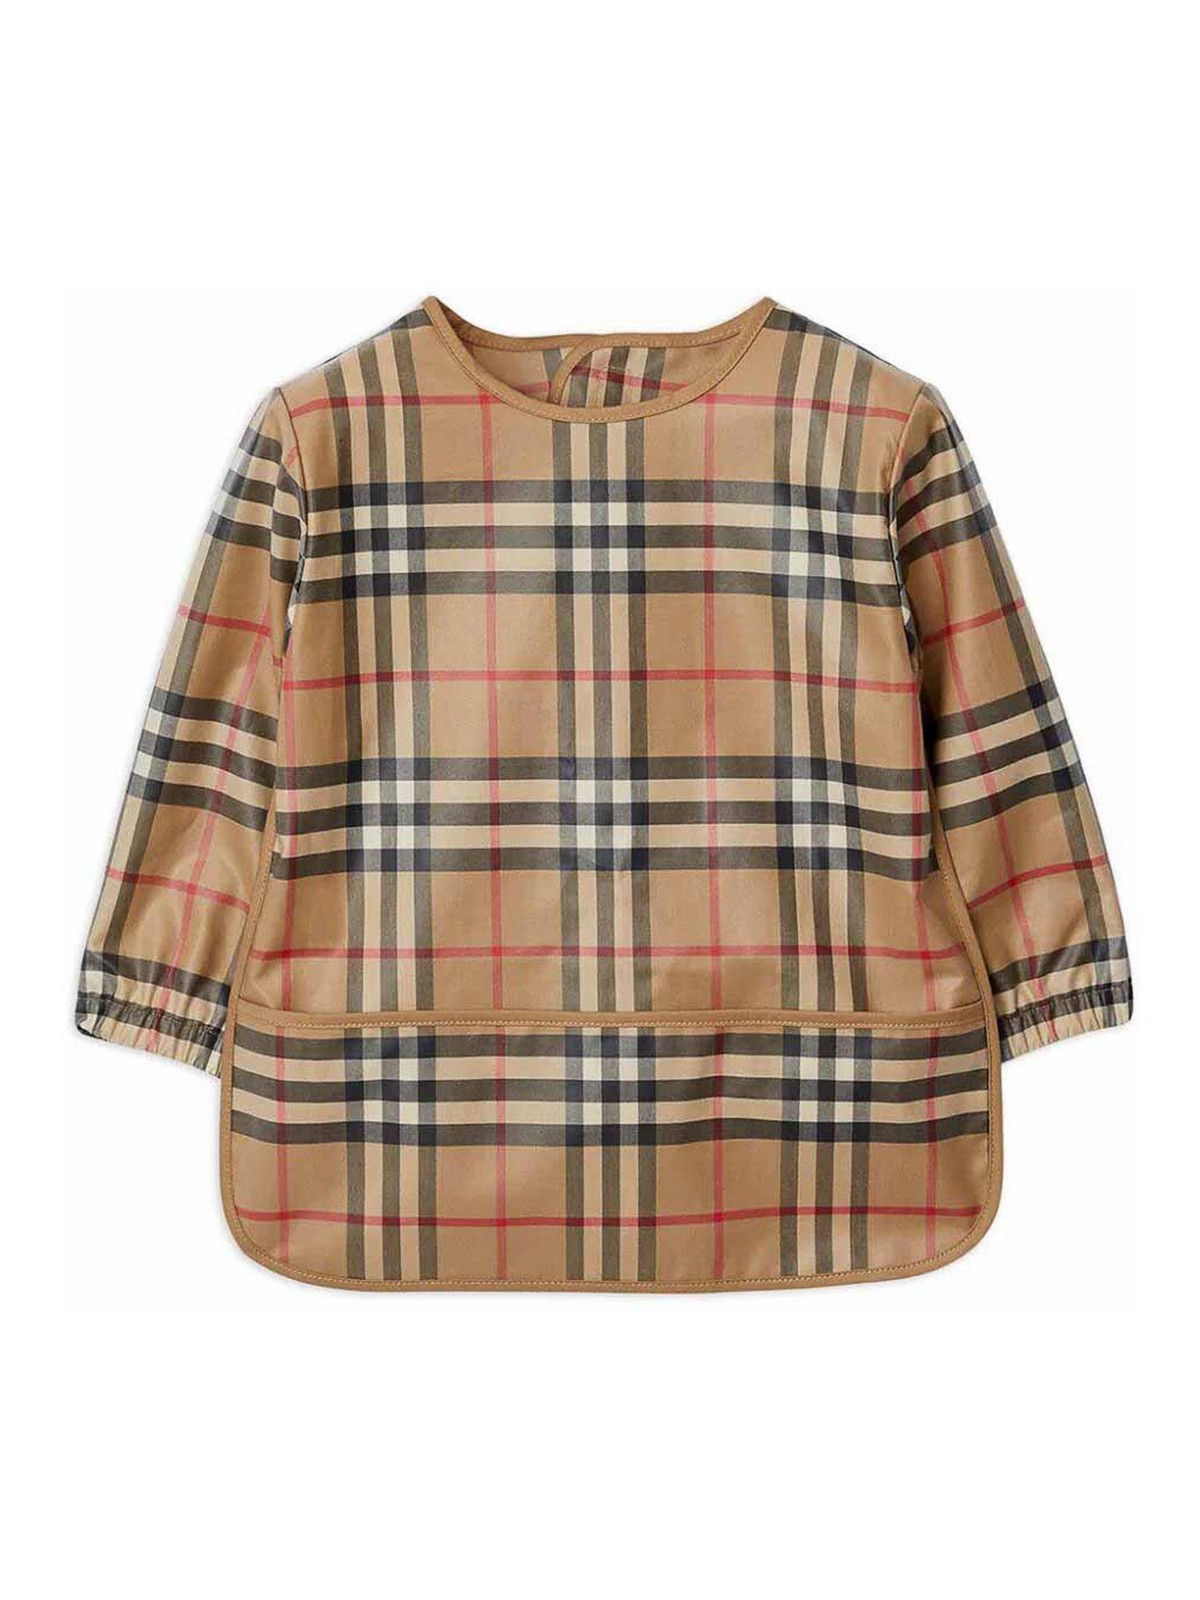 Burberry Kids' Vintage Check Top In Brown